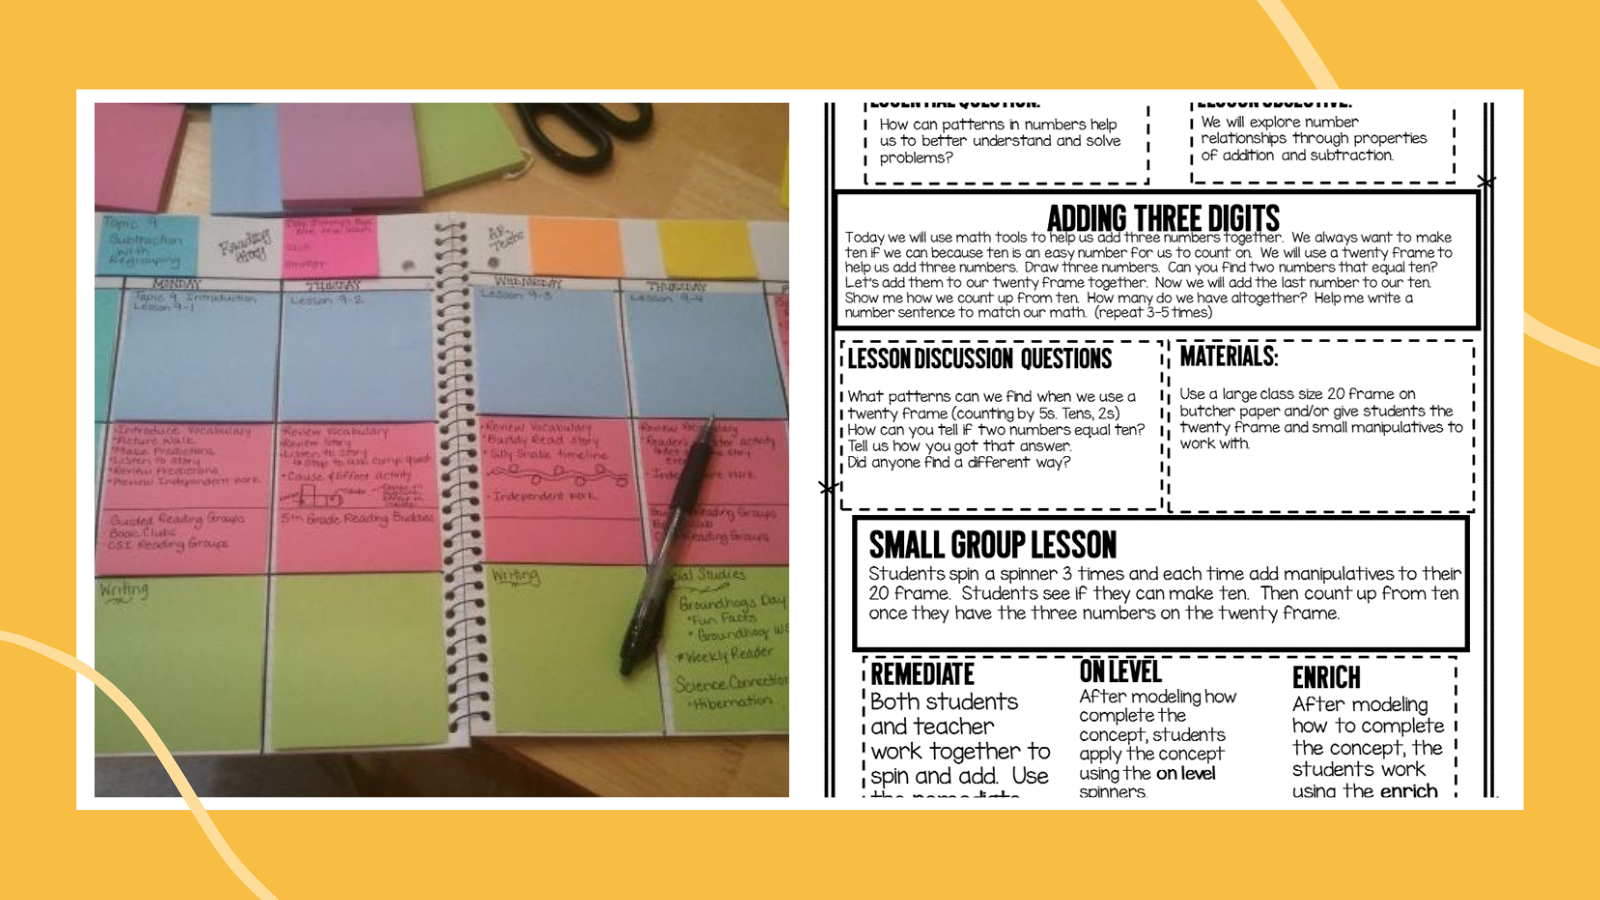 examples of lesson planning: sticky note lesson plans and guided math lesson plan